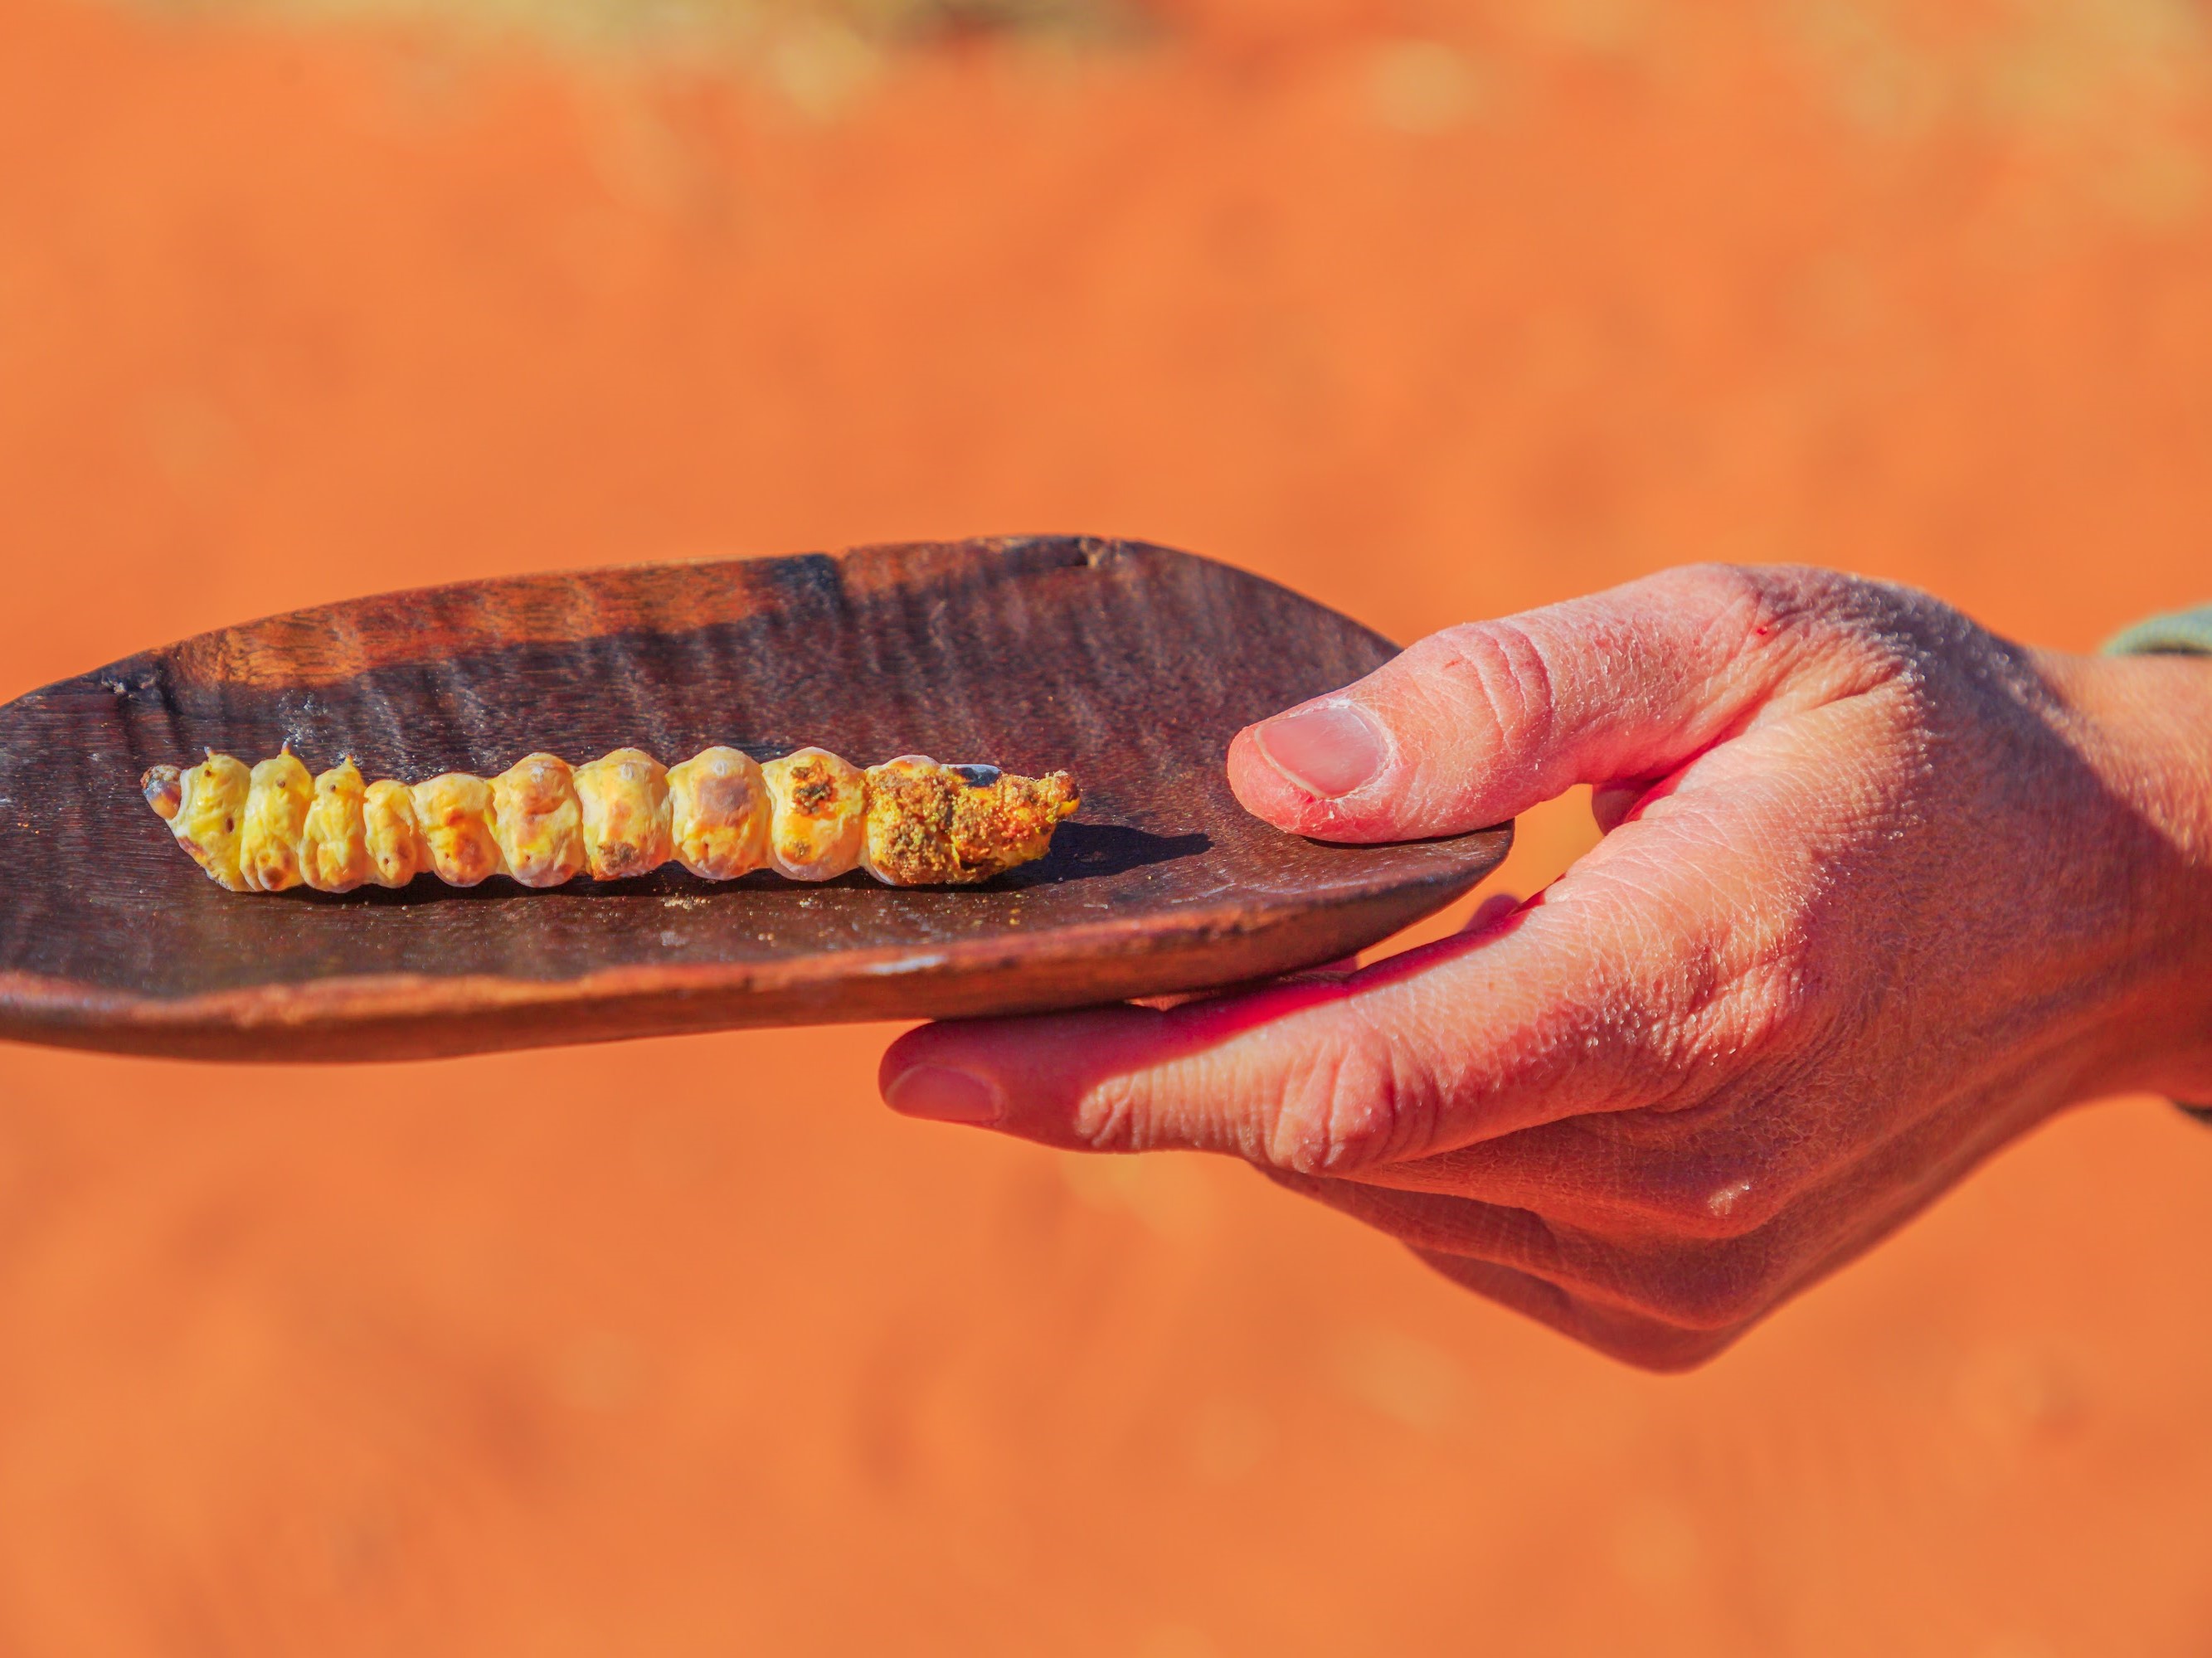 Australia has the potential to become a major player in the billion-dollar global edible insect industry, producing nutritious, sustainable, ethical protein products to bolster global food security, contends a new roadmap by Australia’s national science agency, CSIRO.